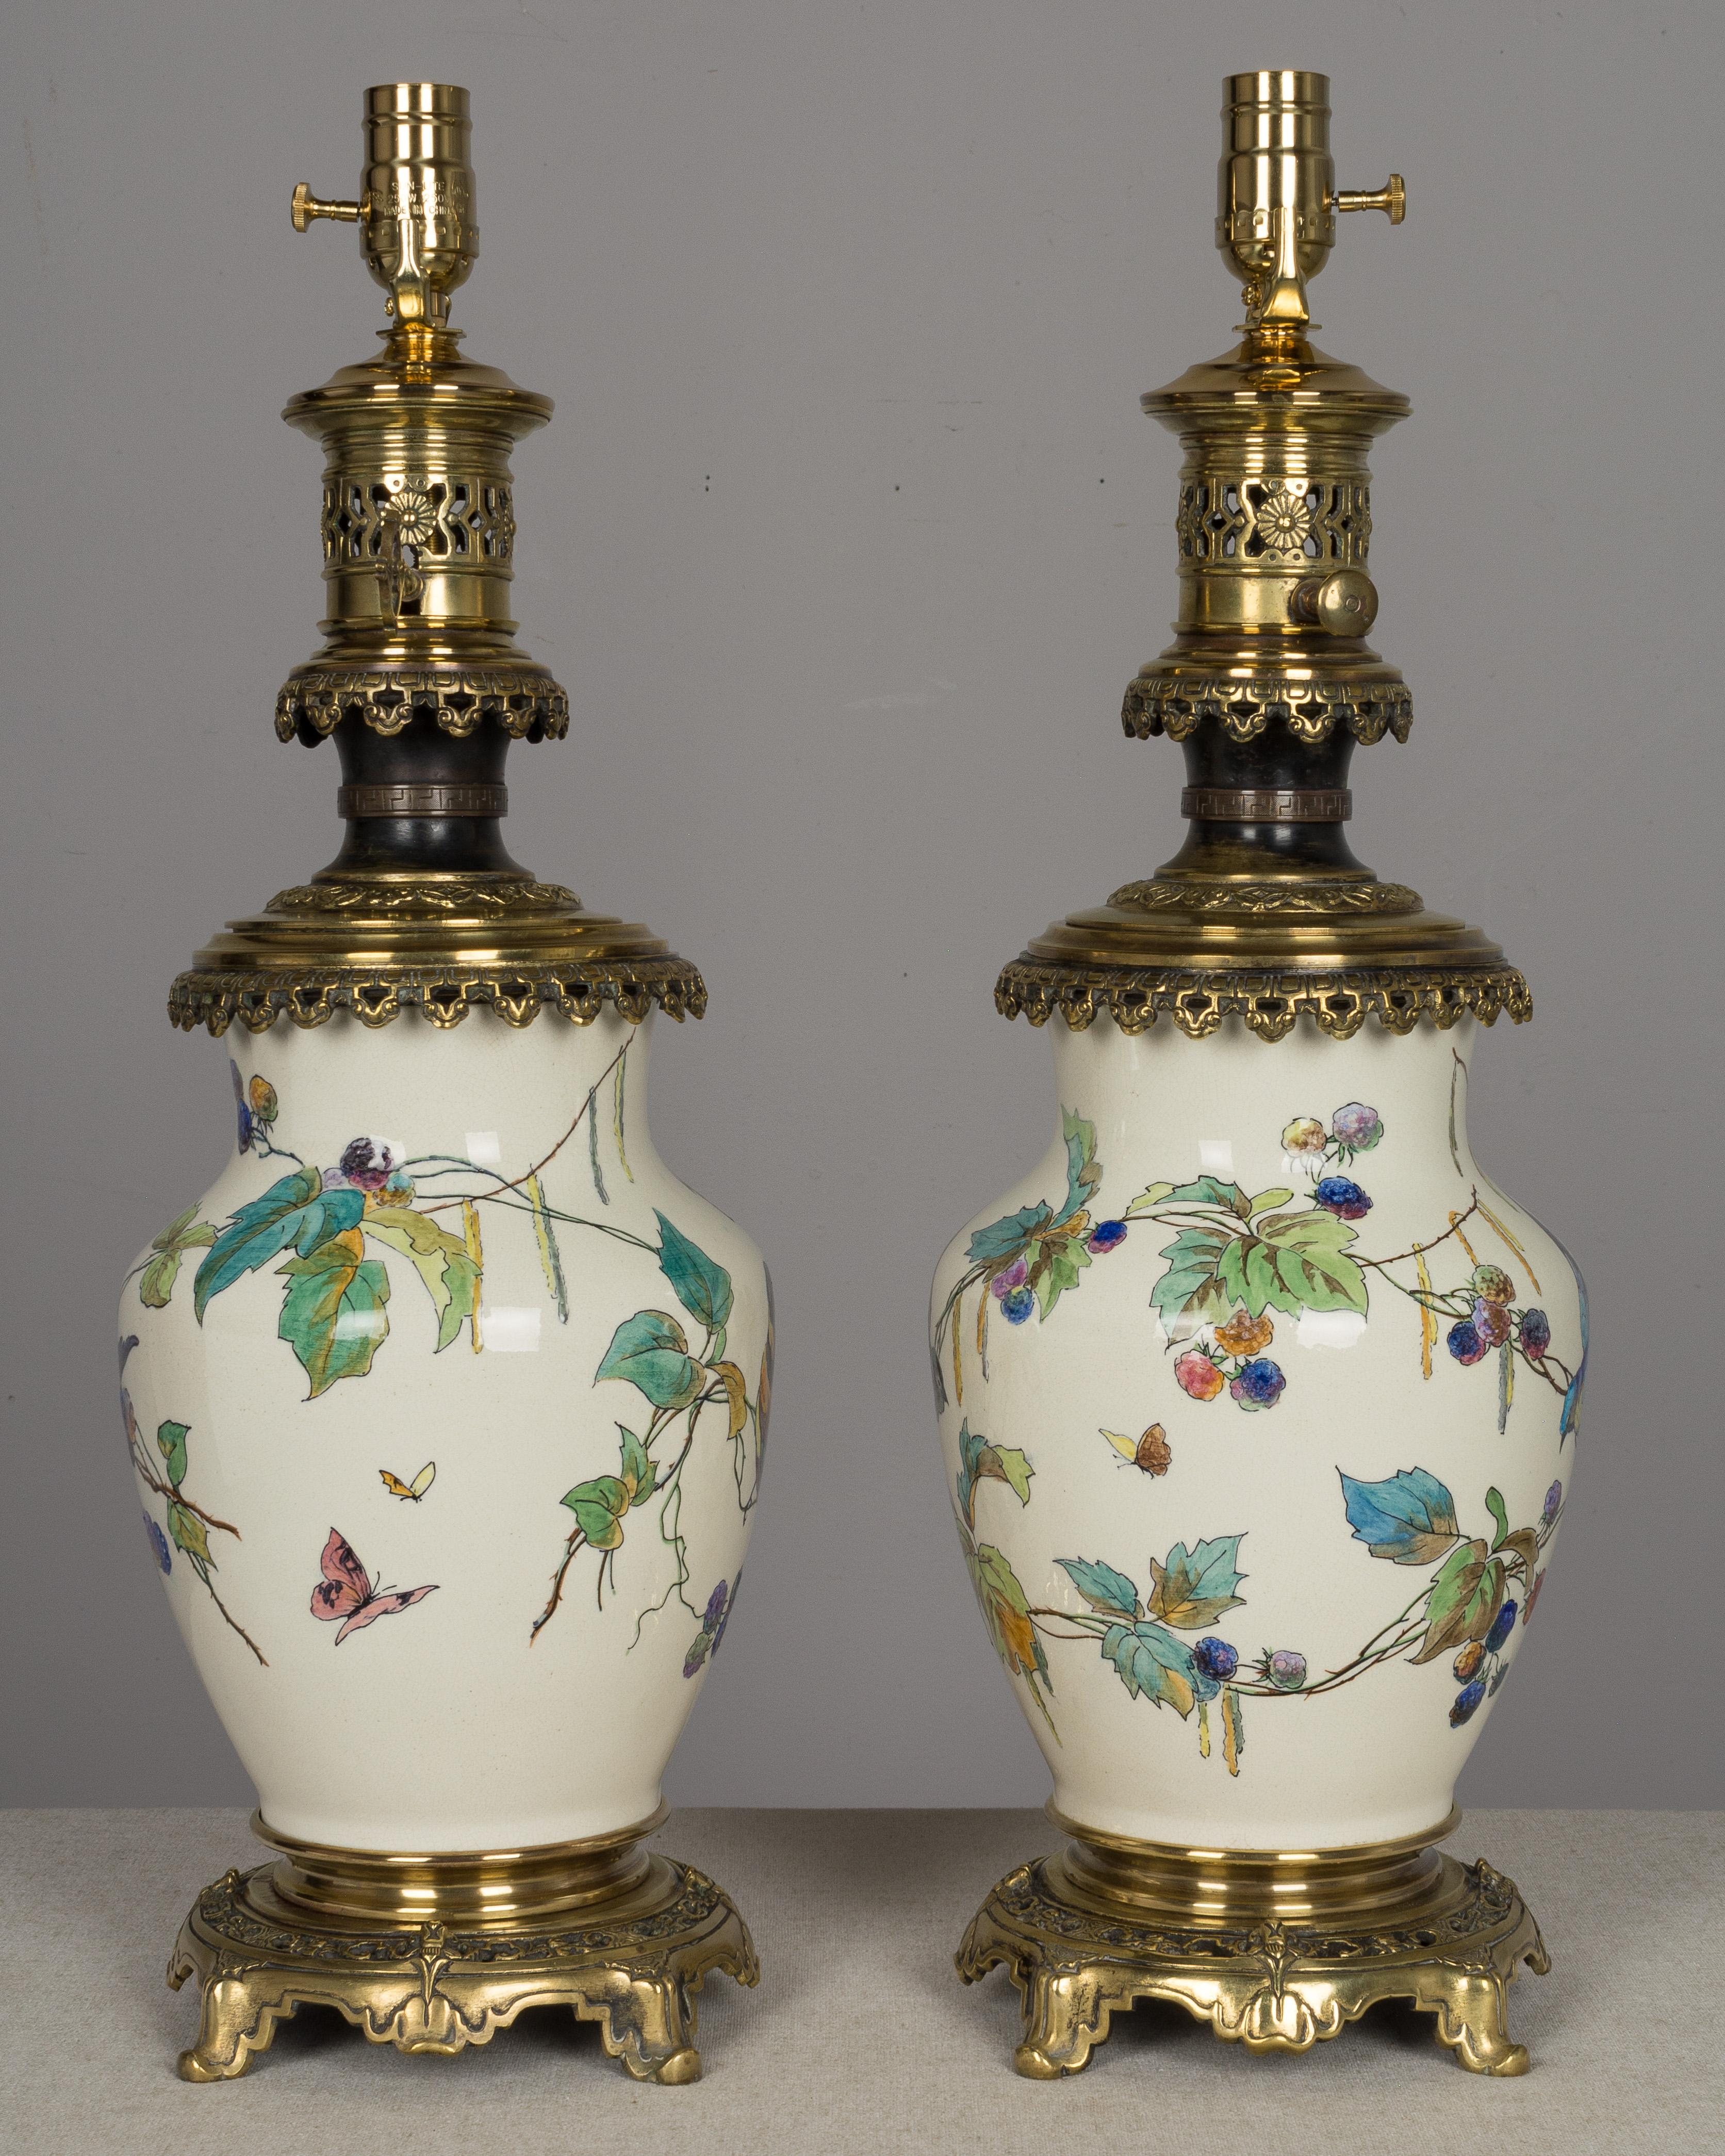 French Pair of Bronze-Mounted Sevres Ceramic Lamps in the Manner of Theodore Deck